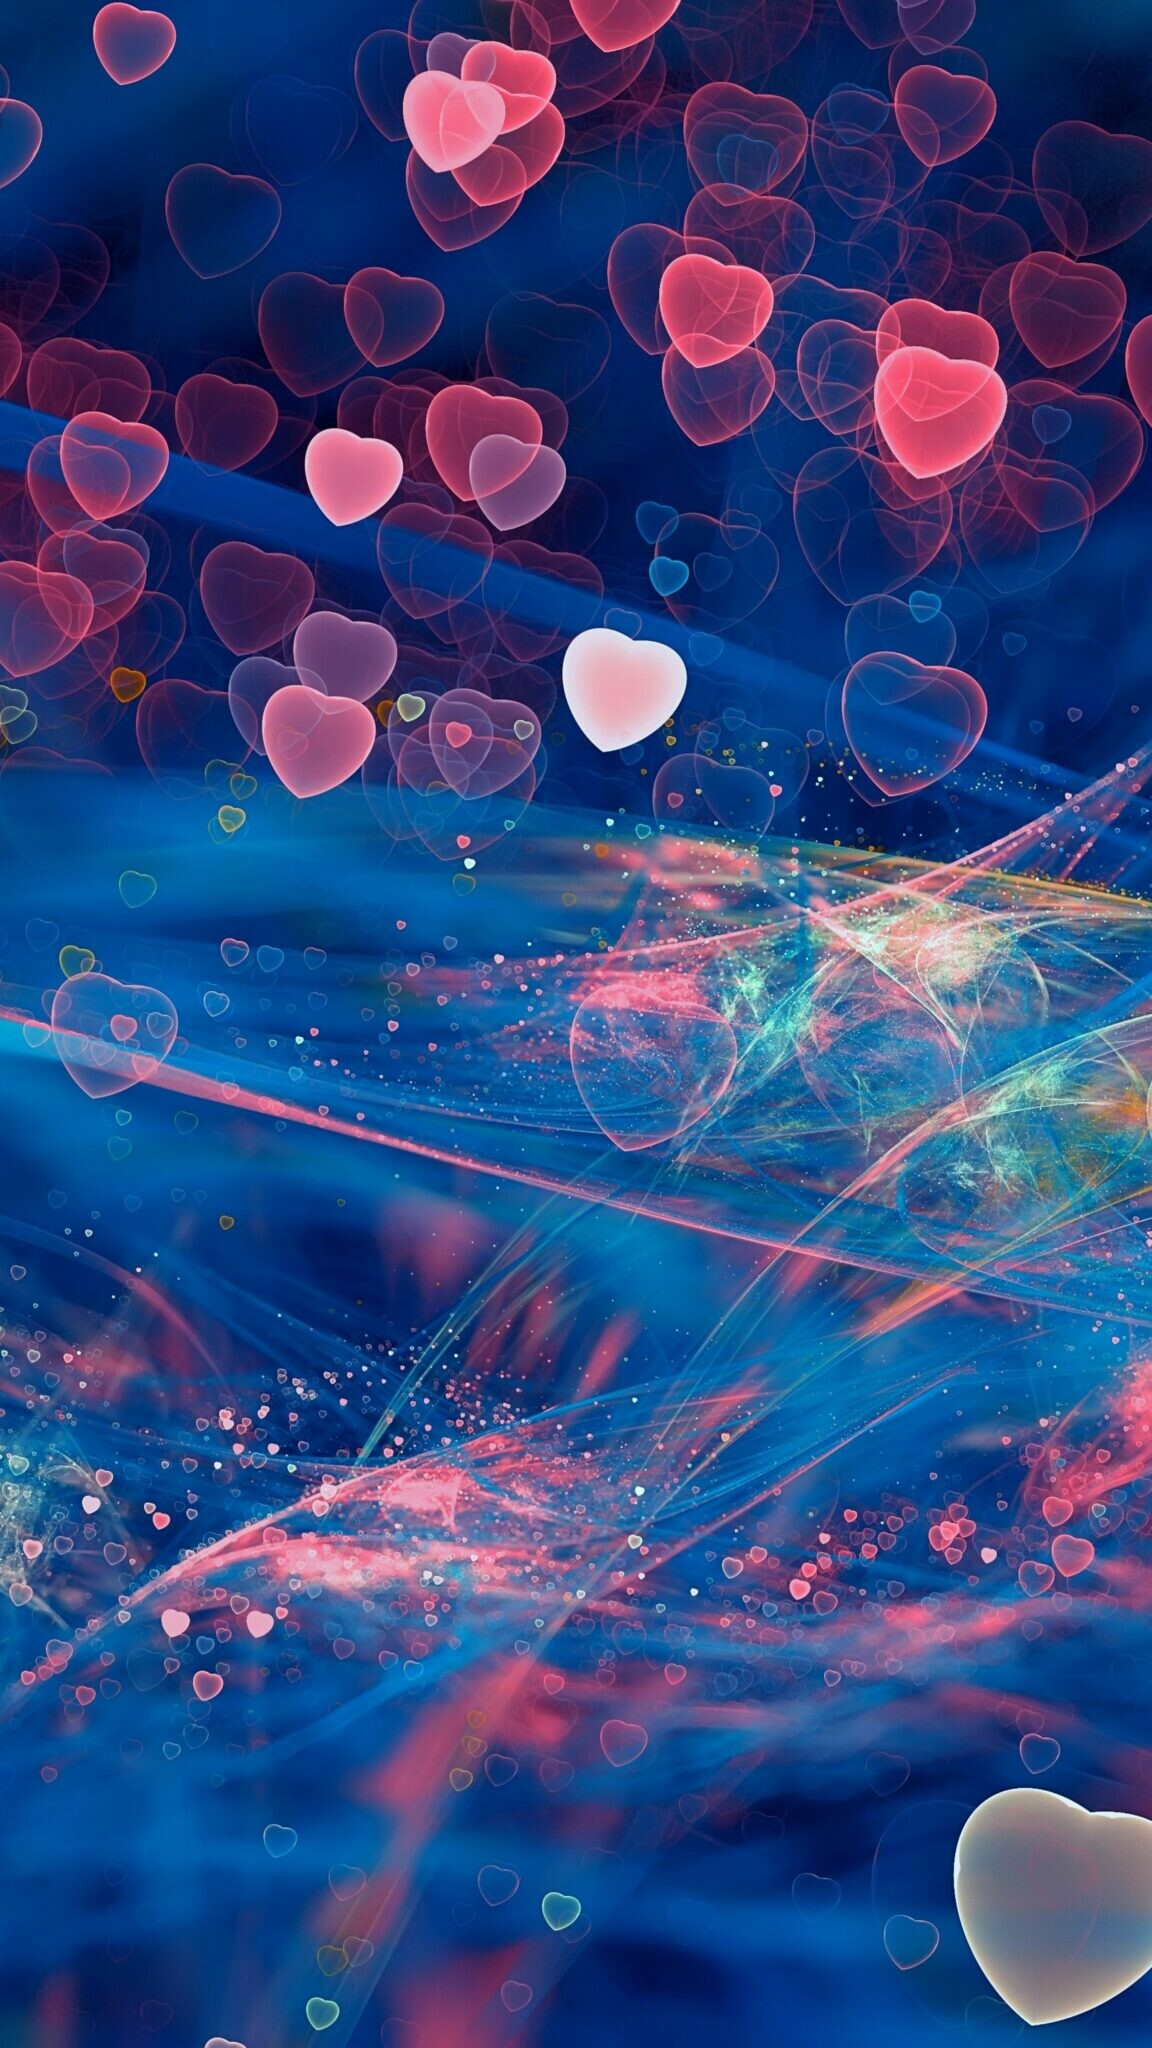 Heart: Used to represent the center of emotion, including affection and love, especially romantic love. 1160x2050 HD Wallpaper.